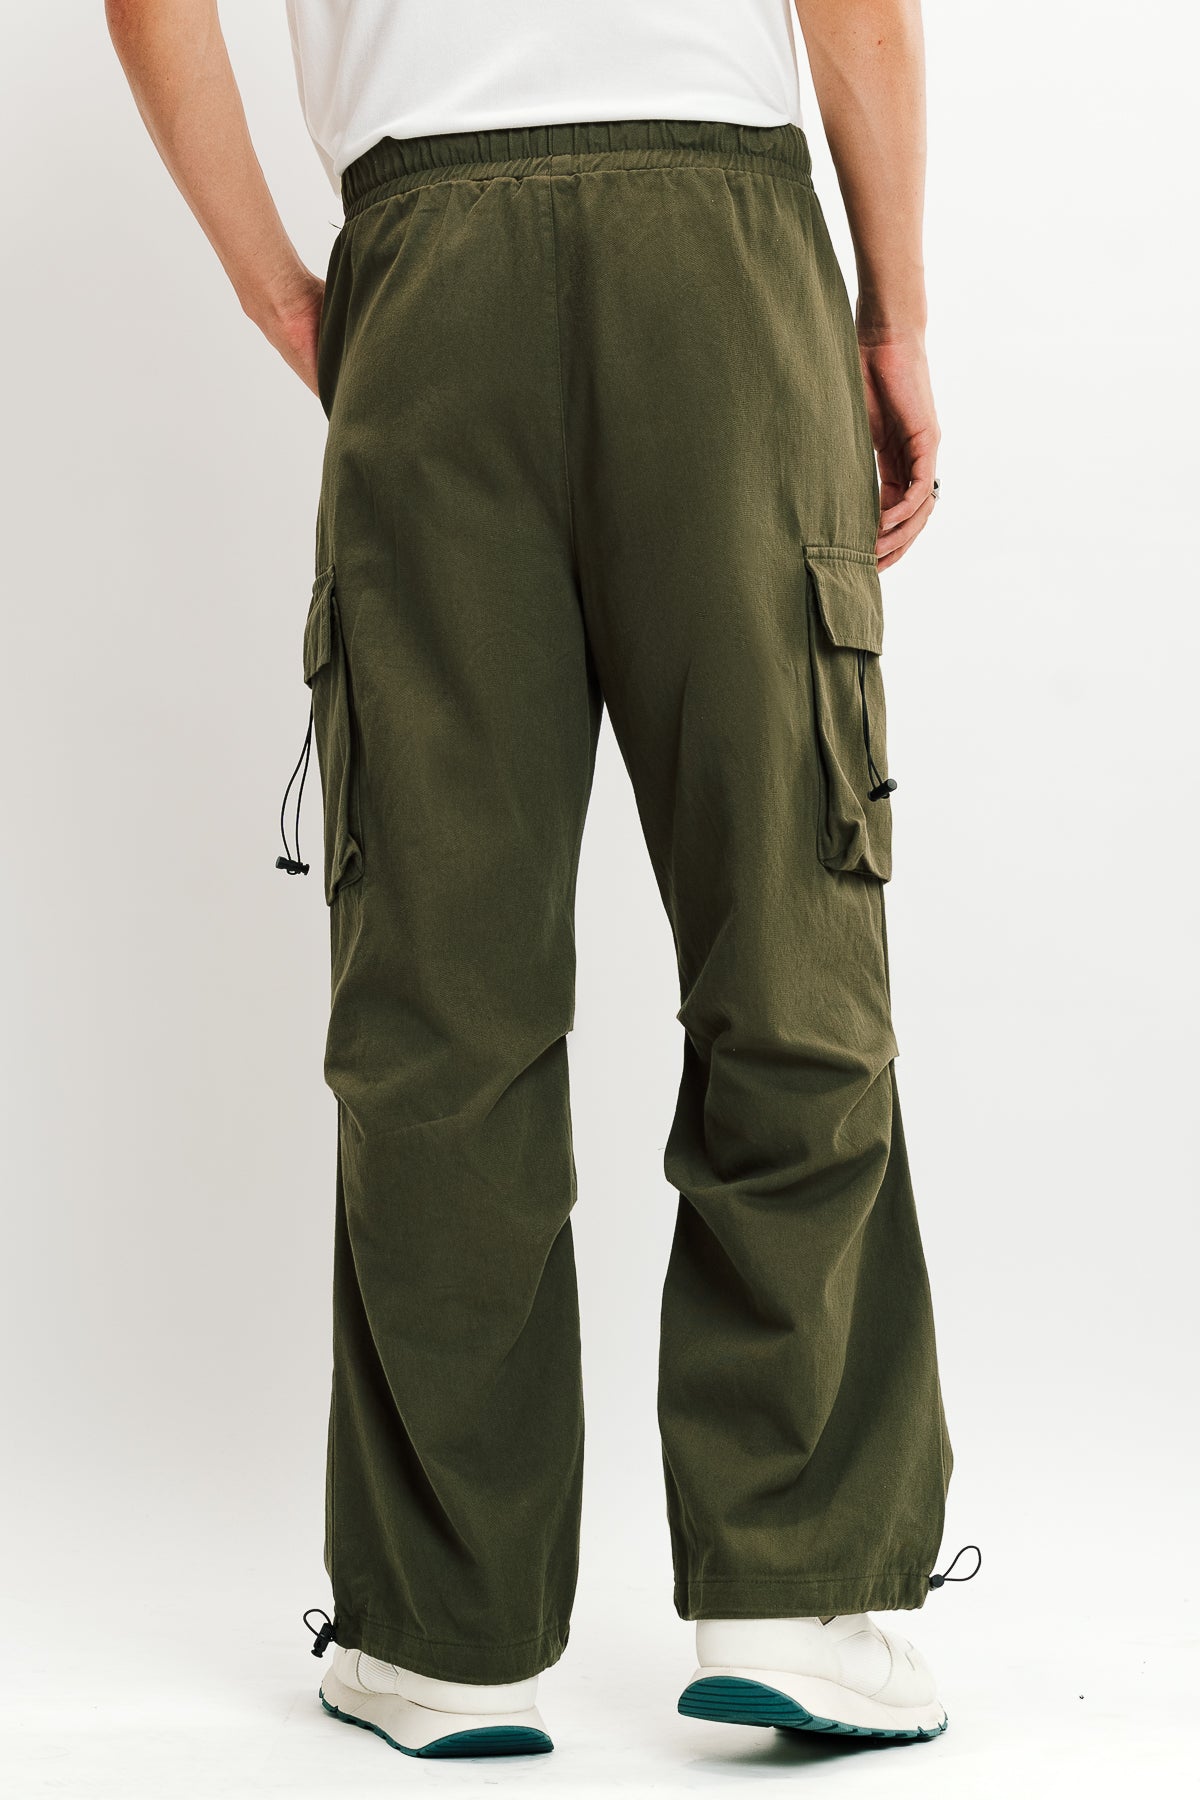 Jeans & Pants | Man Olive Green Color Cargo Pant 6 Pocket | Freeup